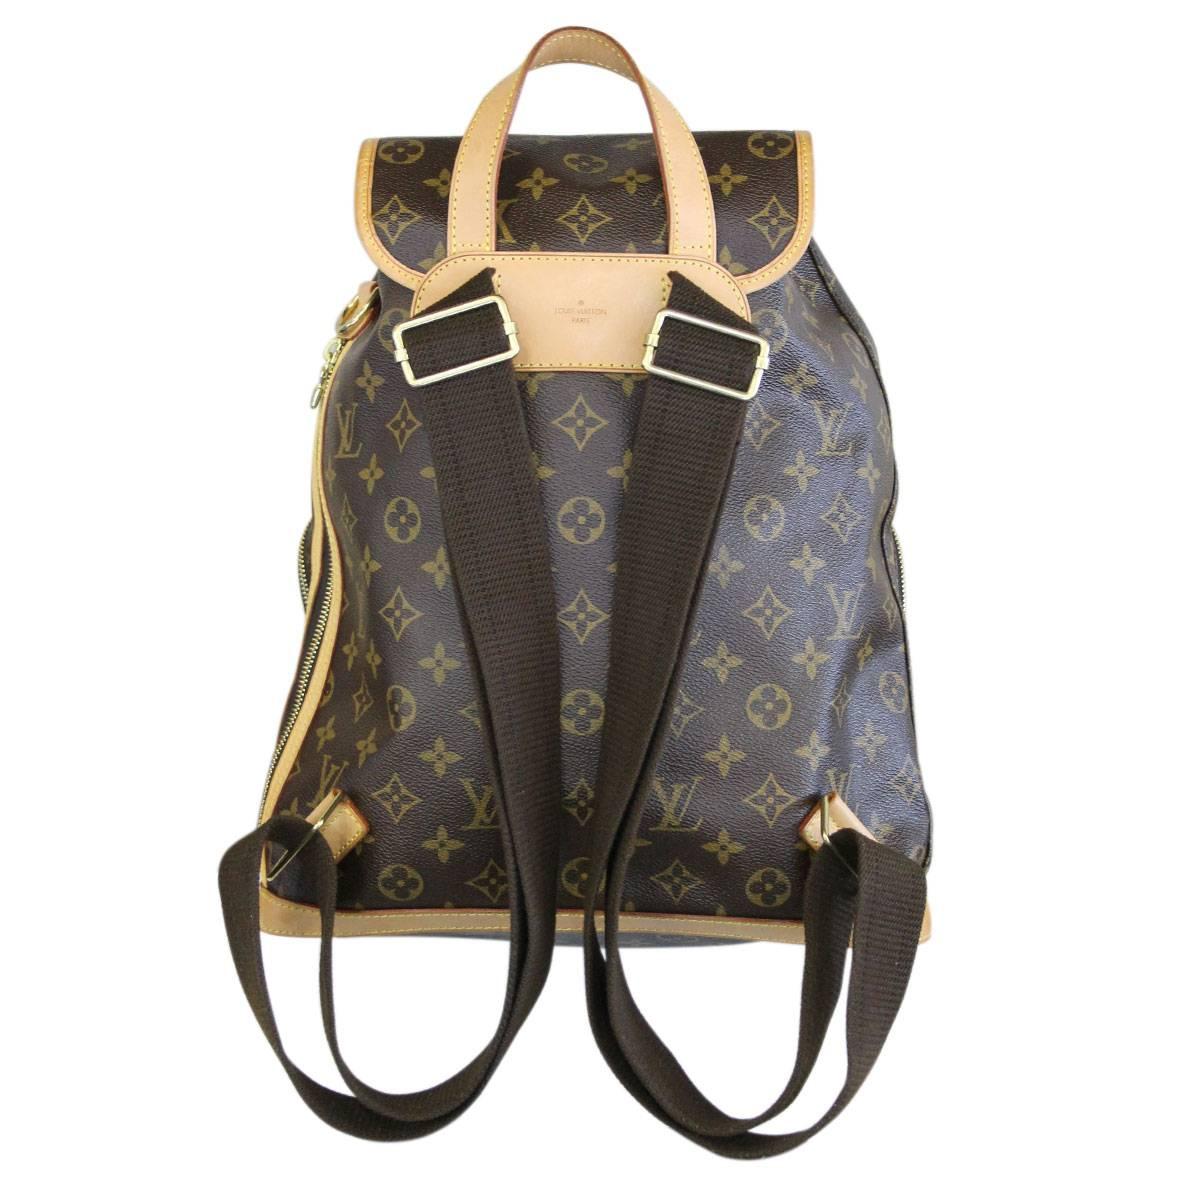 Louis Vuitton School Backpacks - For Sale on 1stDibs  louis vuitton school  bags, louis vuitton bags school, louis vuitton bag for school